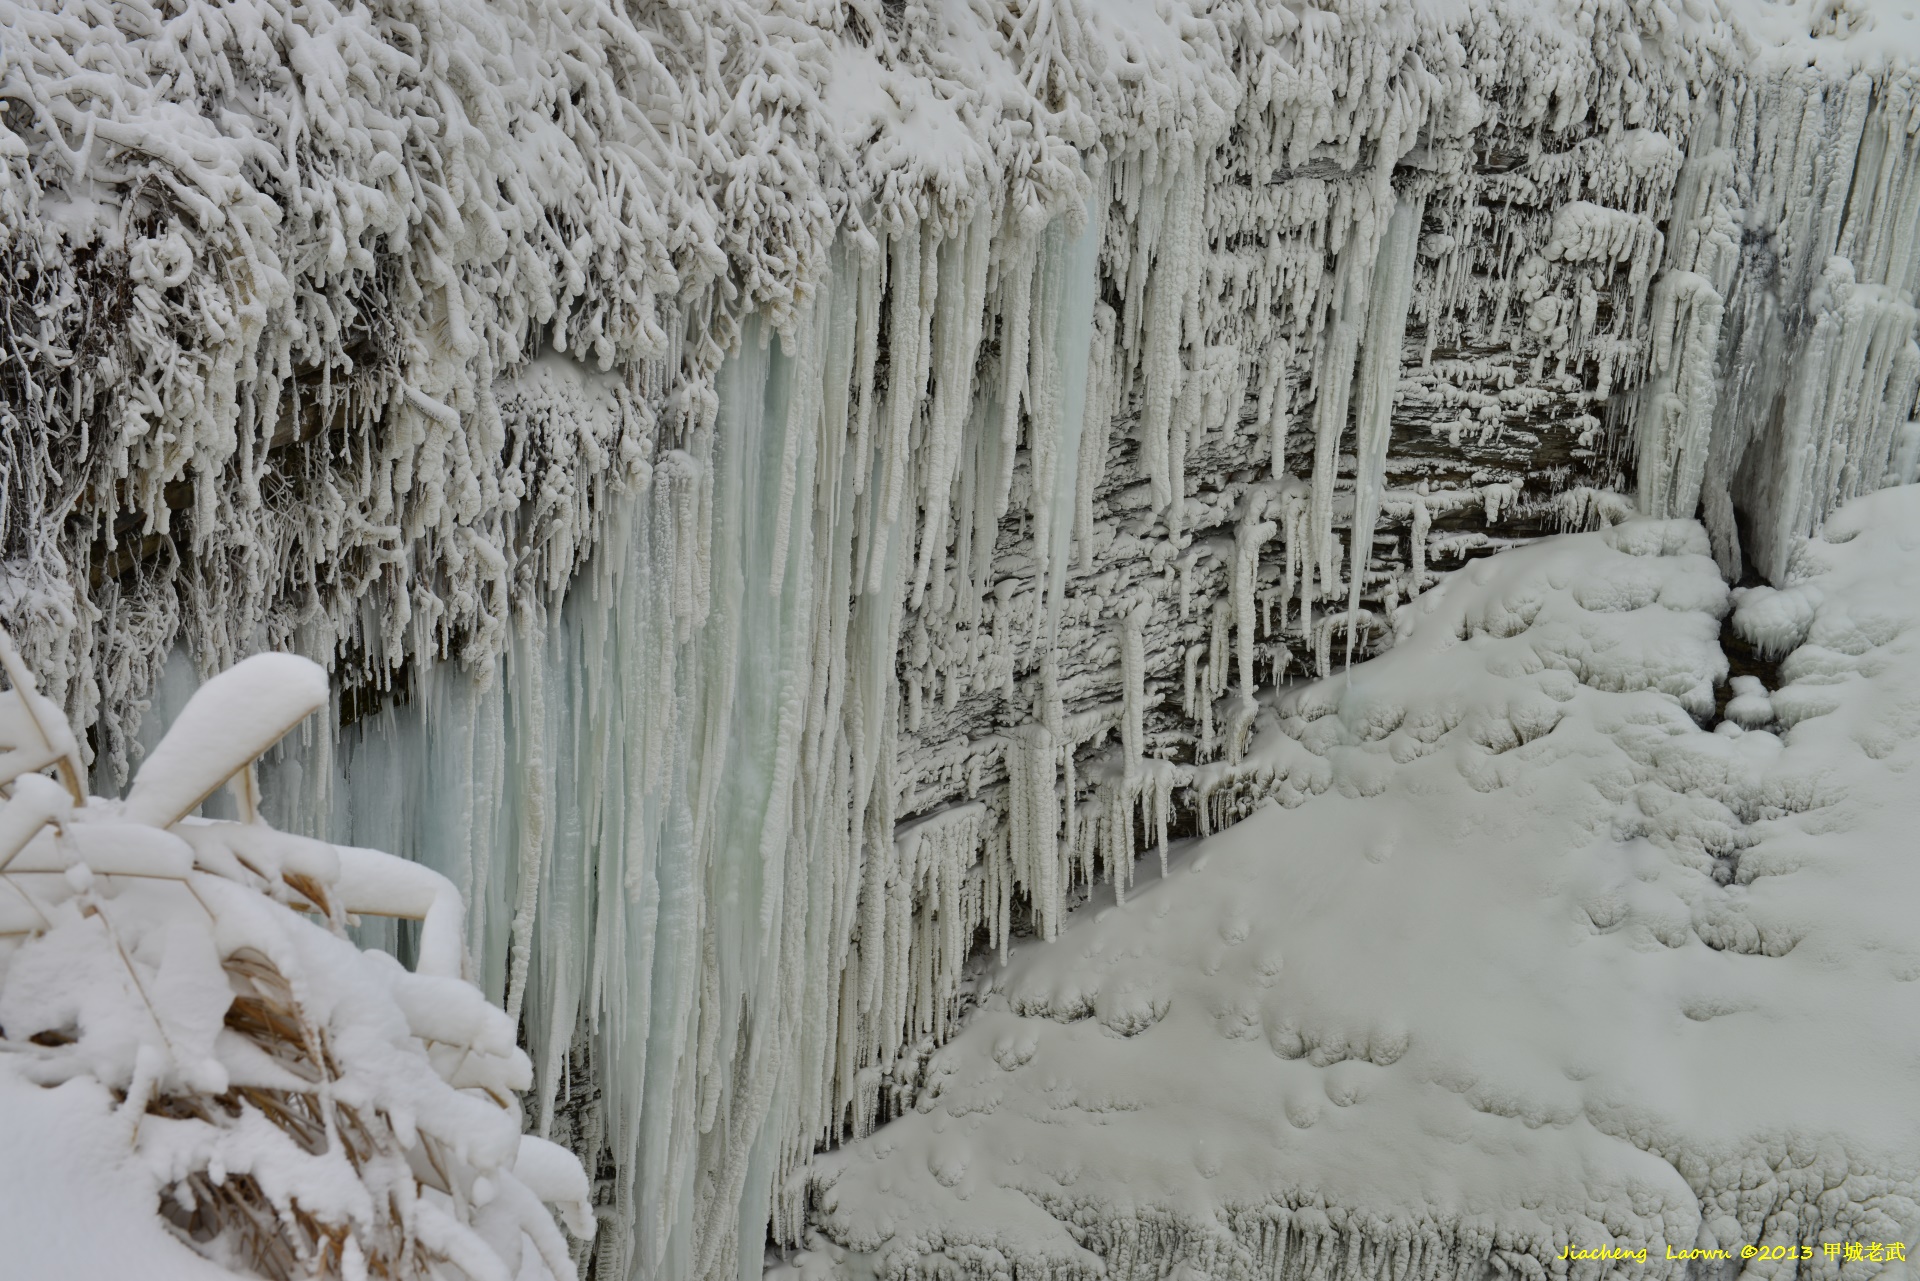 Letchworth SP Icicle in Miidle Fall